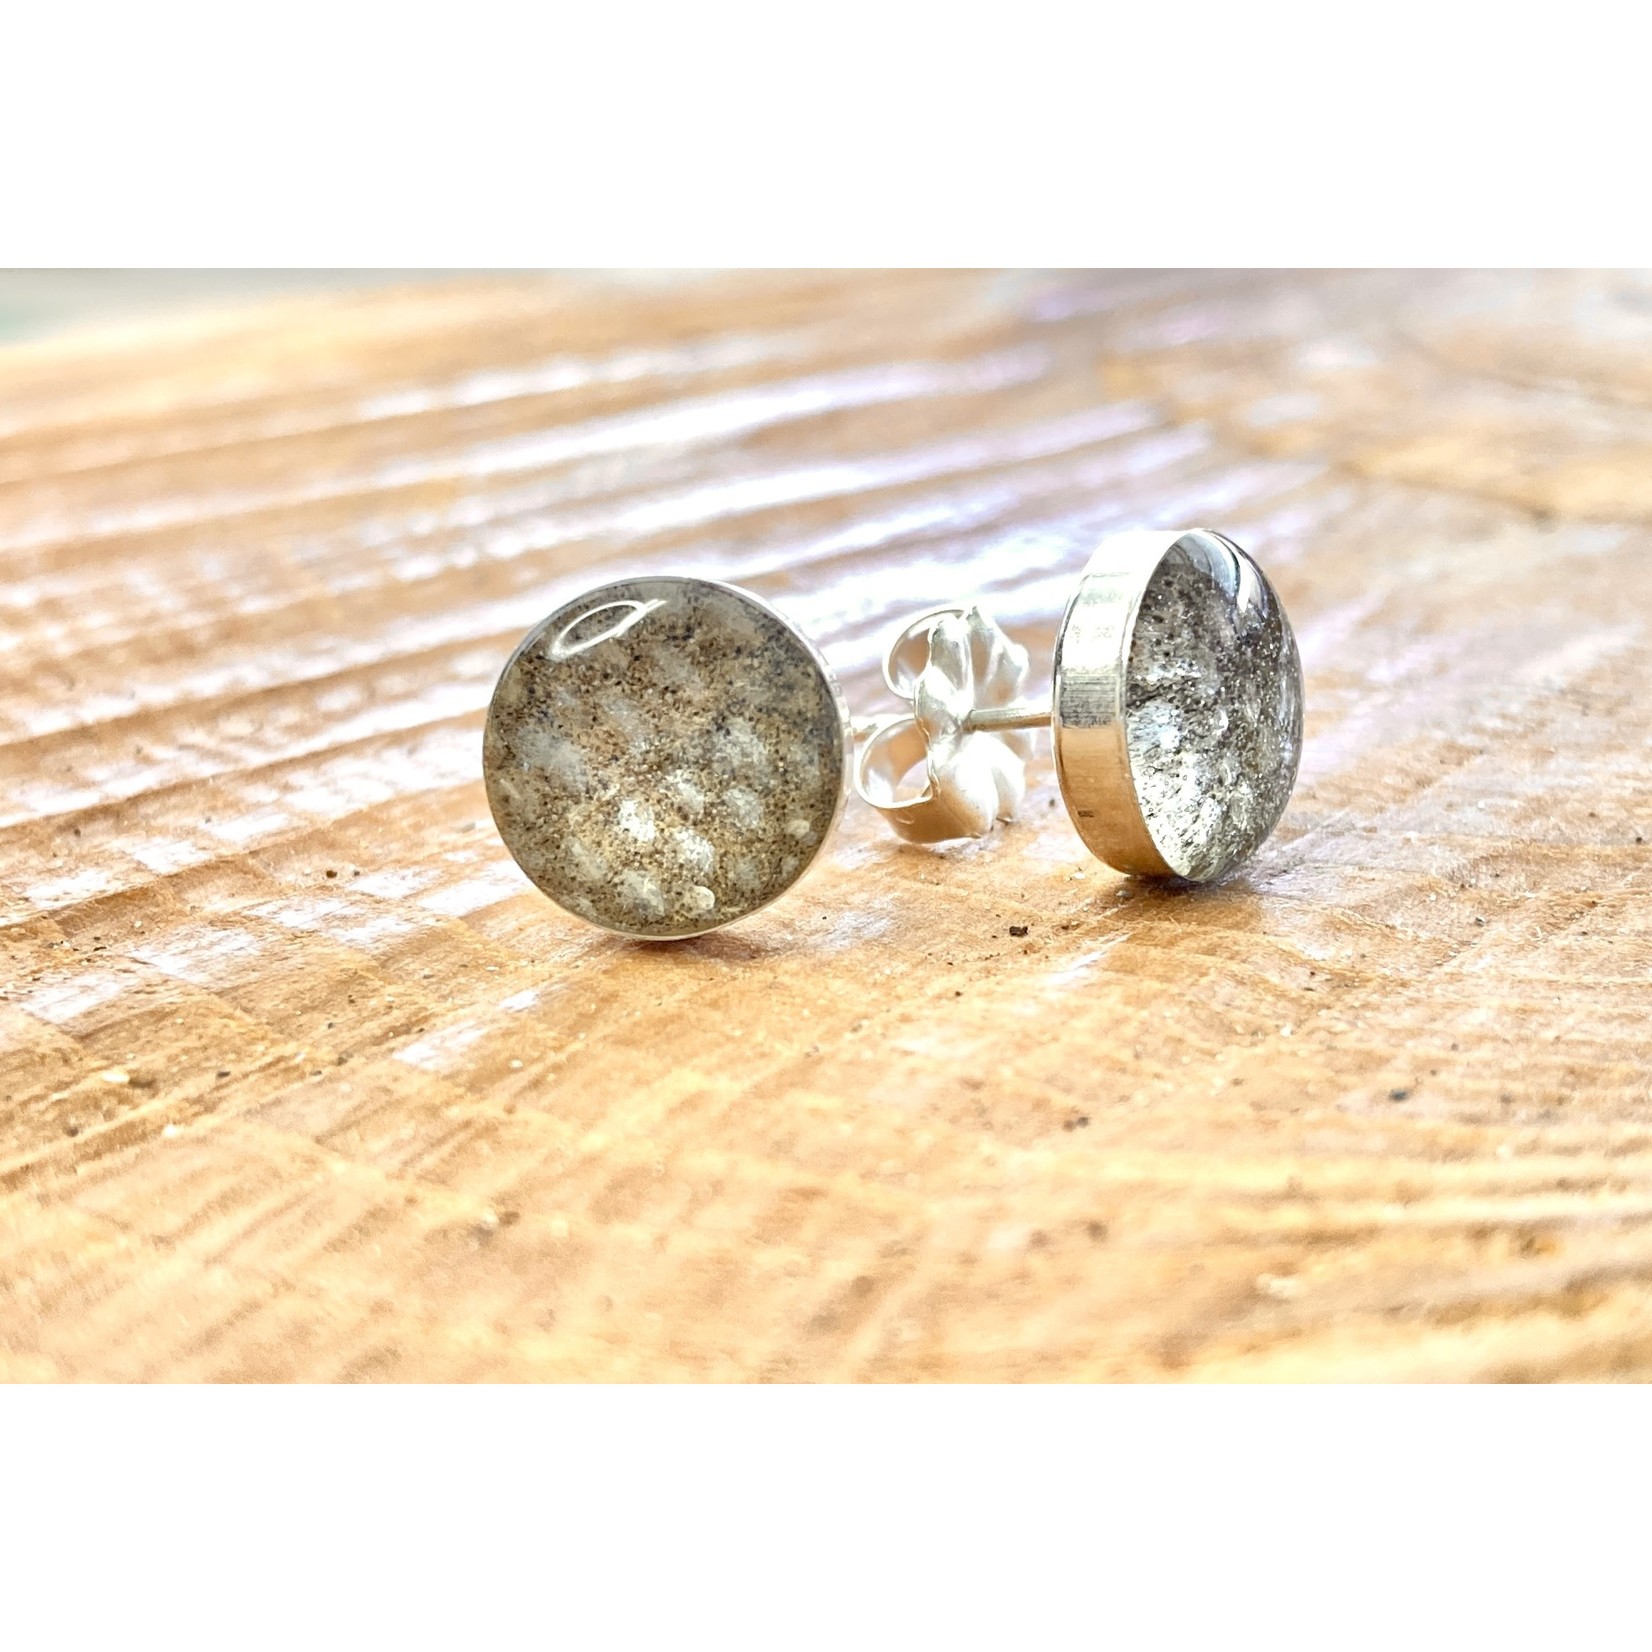 Wild by Nature Stud Earrings | Wild by Nature